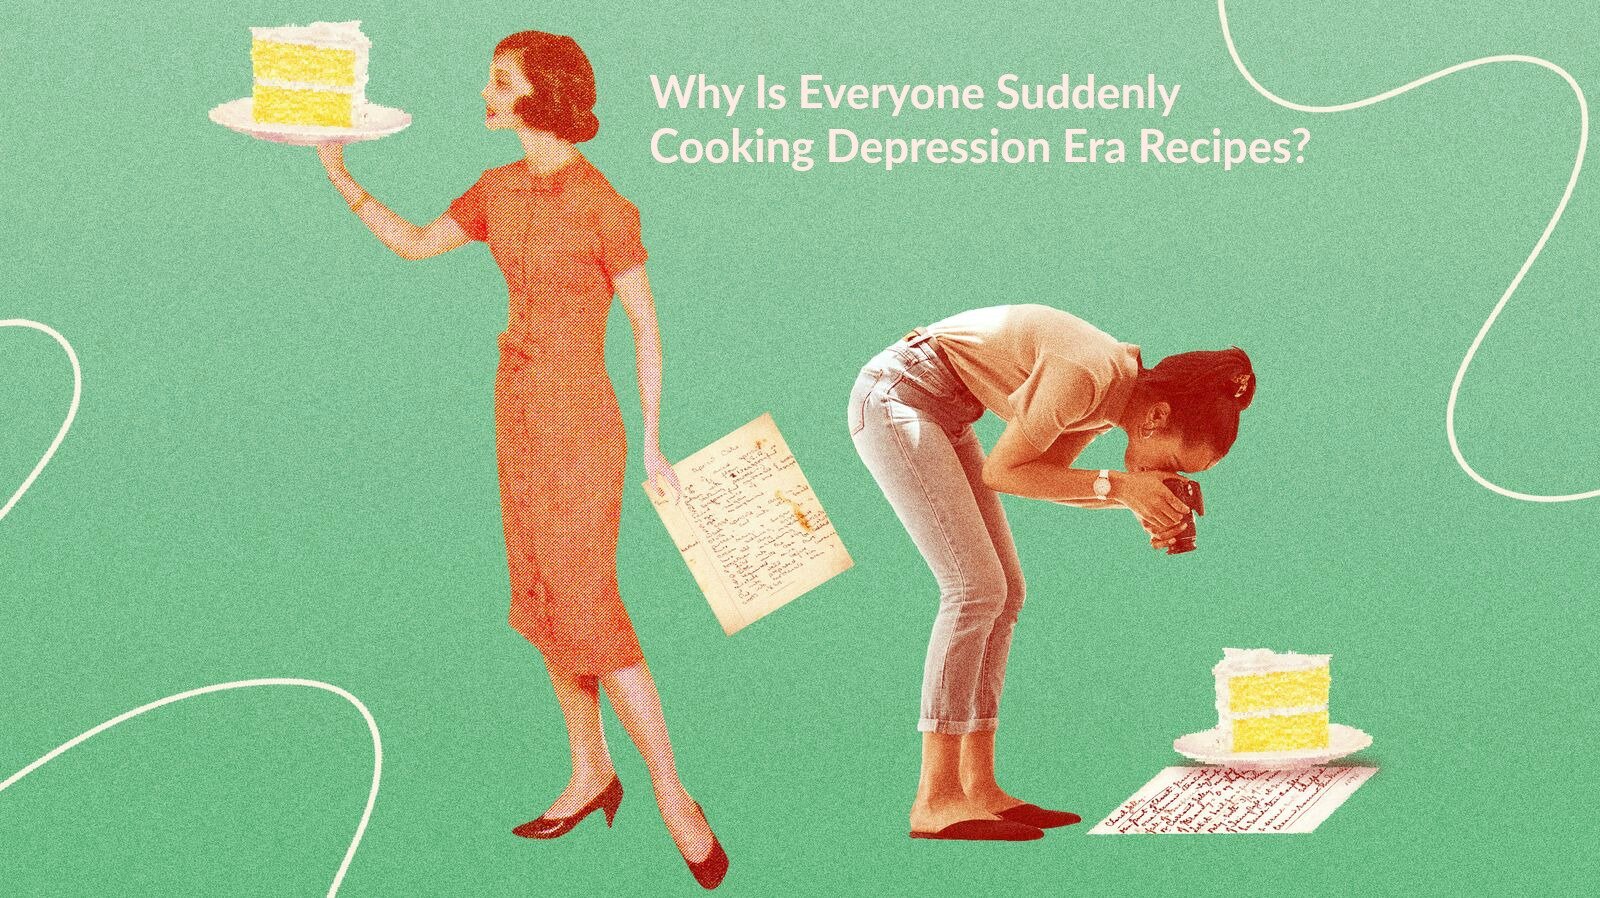 Why Is Everyone Suddenly Cooking Depression Era Recipes?